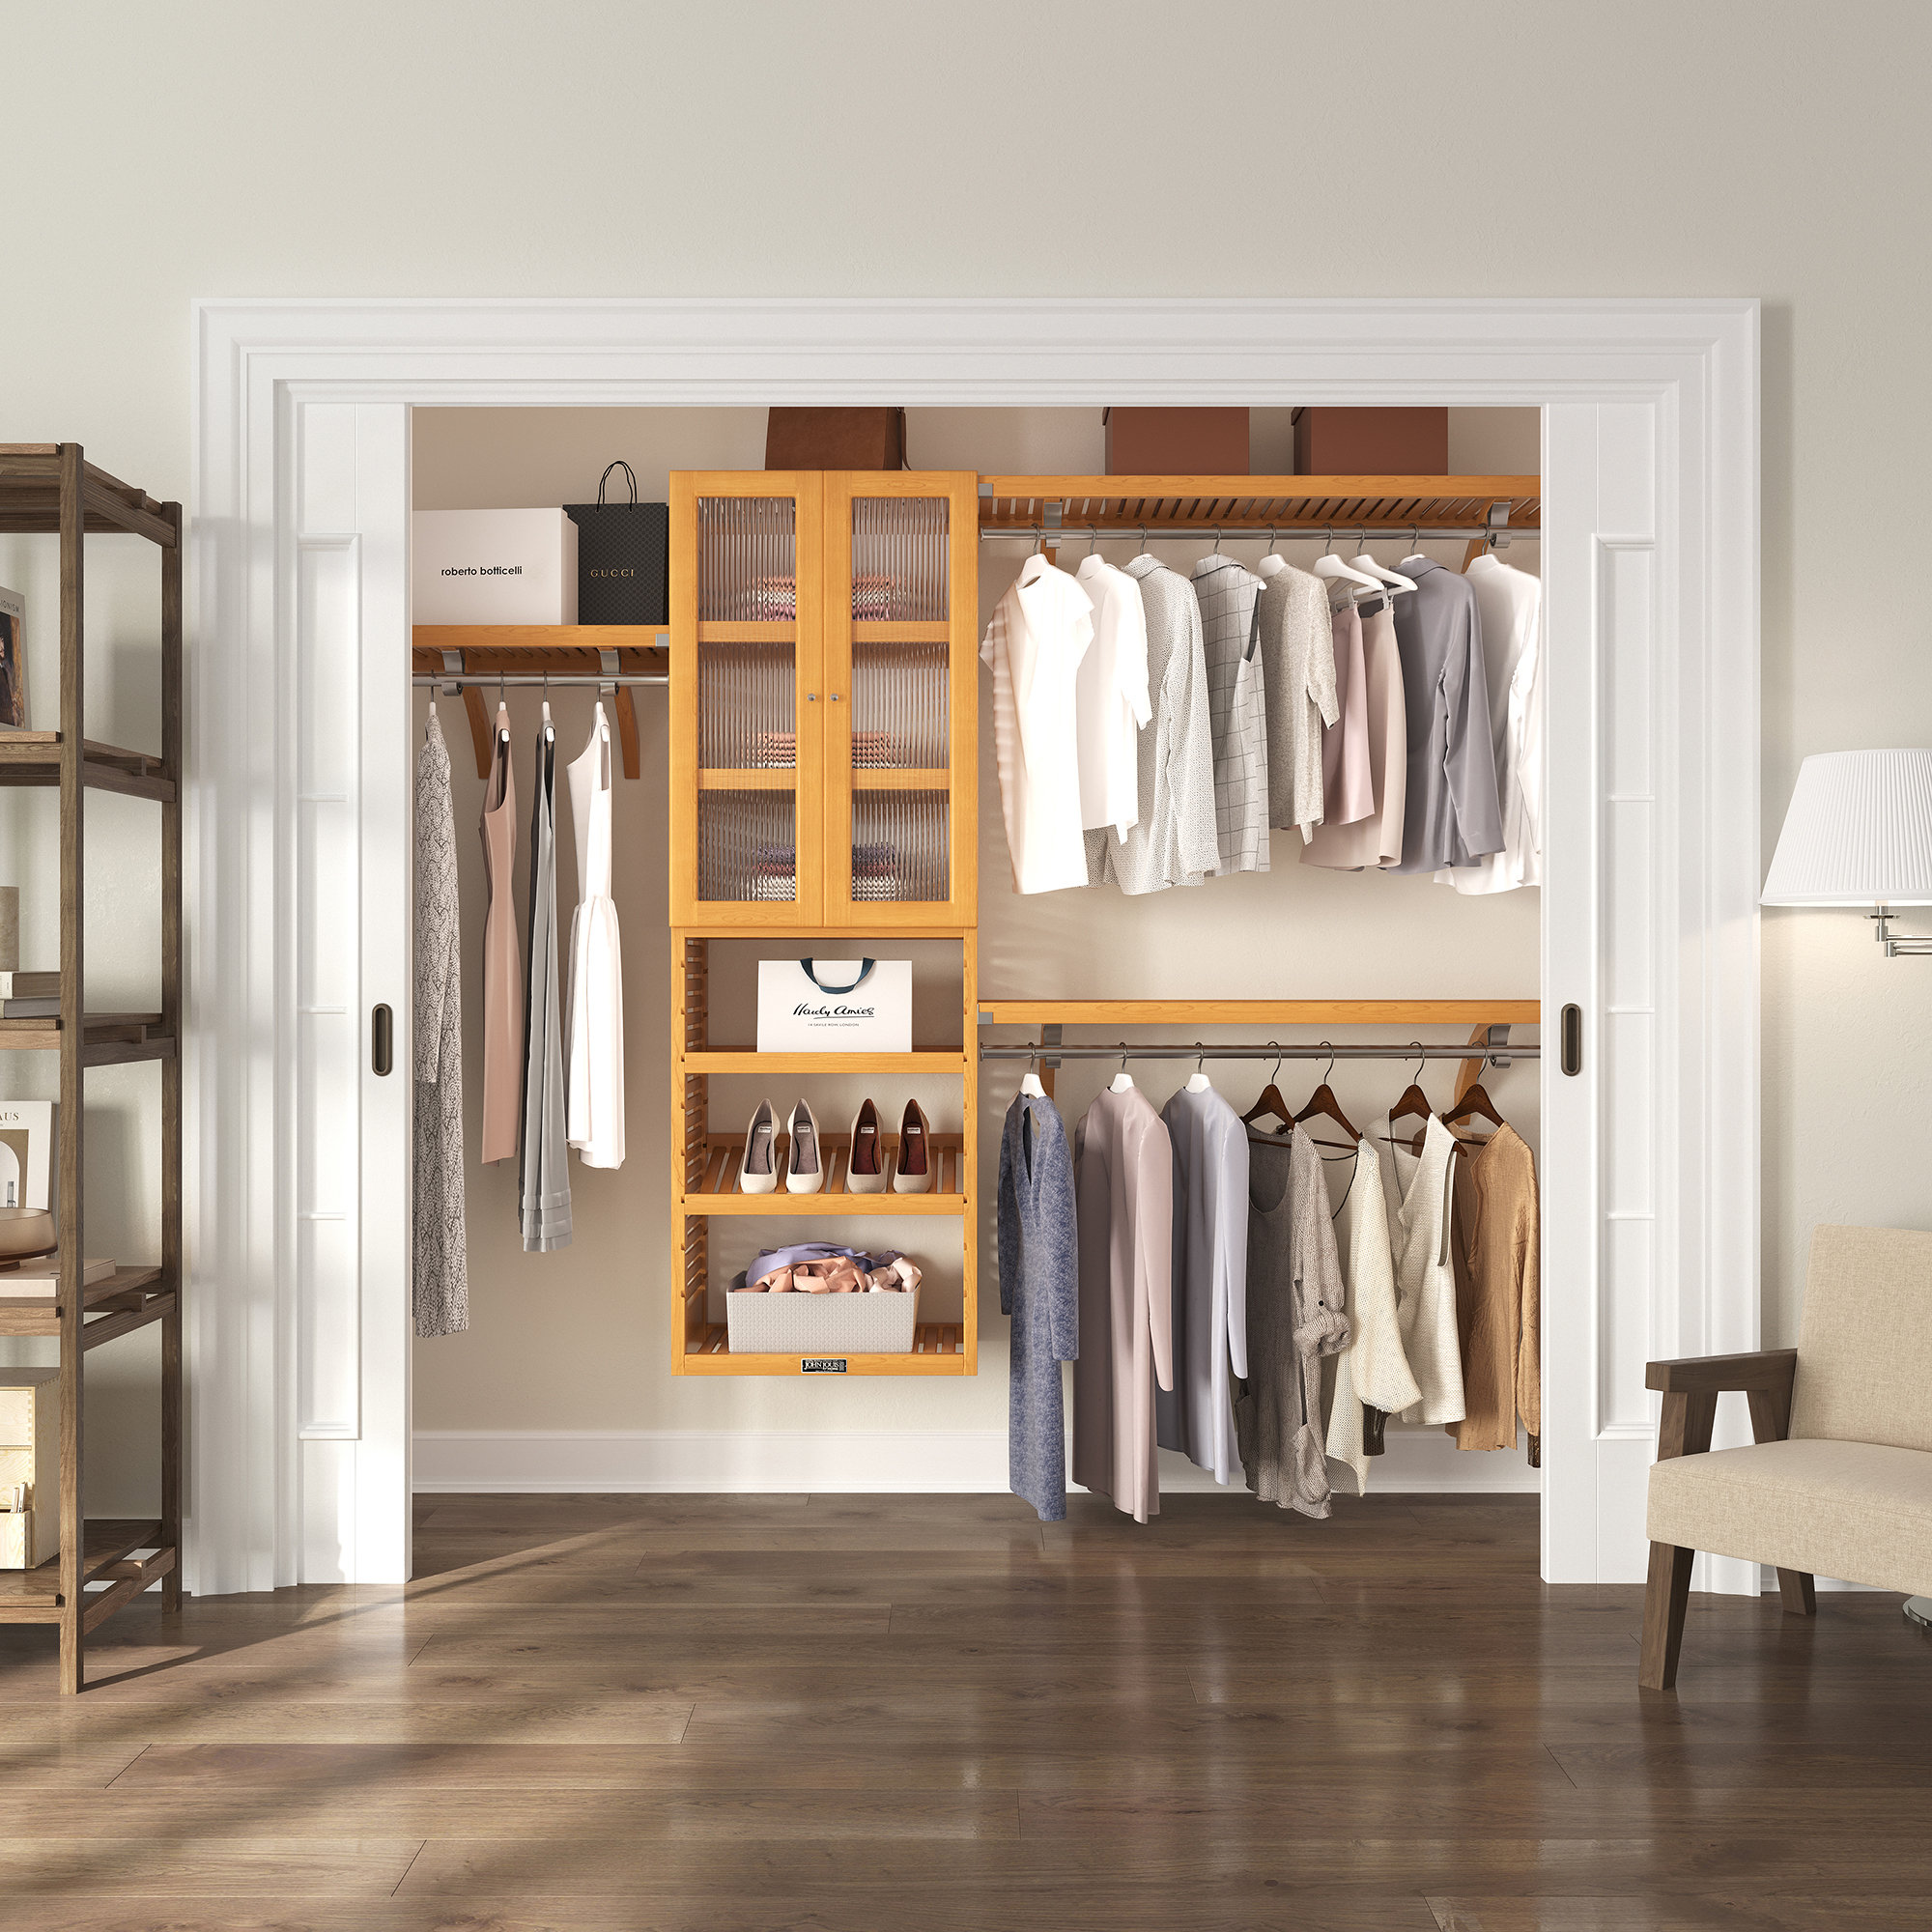 Easy Track 4-ft to 8-ft W x 6-ft H White Solid Shelving Wood Closet System  in the Wood Closet Kits department at